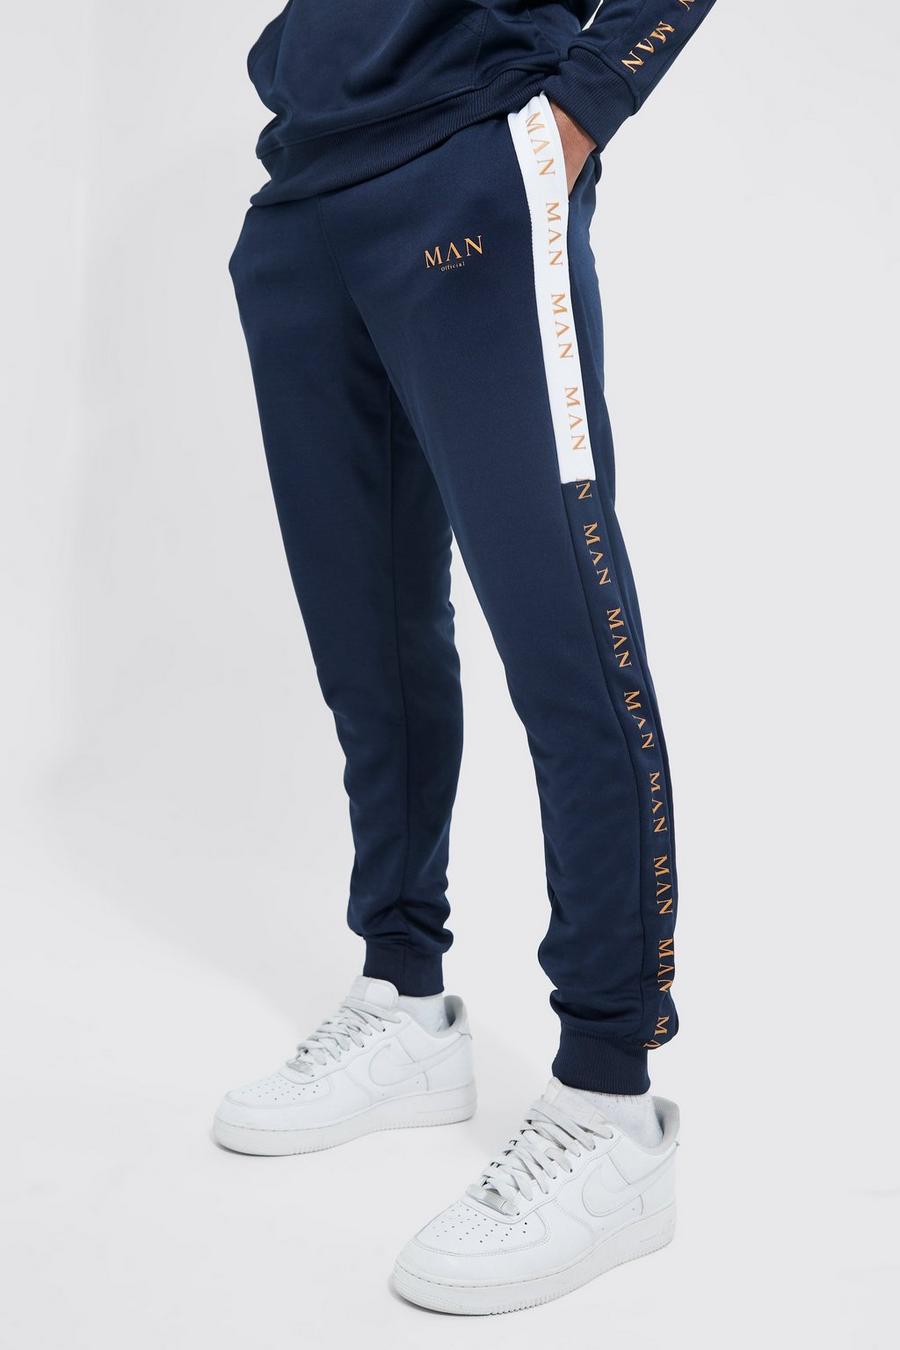 Pantaloni tuta Man Gold in tricot Skinny Fit con pannelli laterali, Navy image number 1